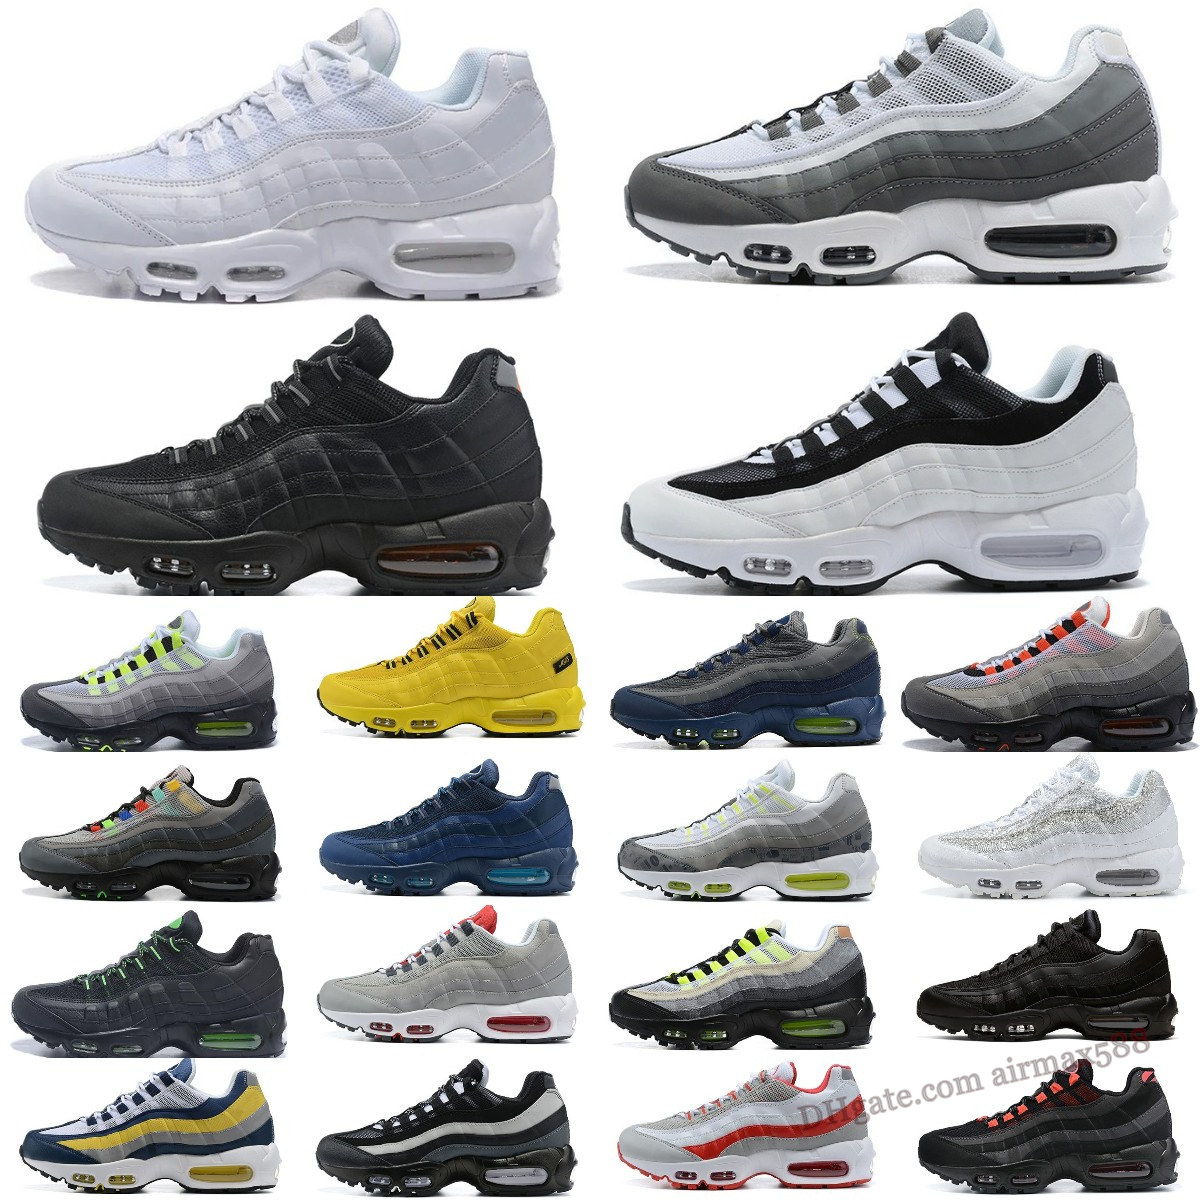 

Designer Mens max 95 Running Shoes Speed OG Solar Triple Black White 95s Dark Army Worldwide Seahawks Particle Grey Neon Air Red Greedy outdoor Sports Sneakers, Please contact us for more colors